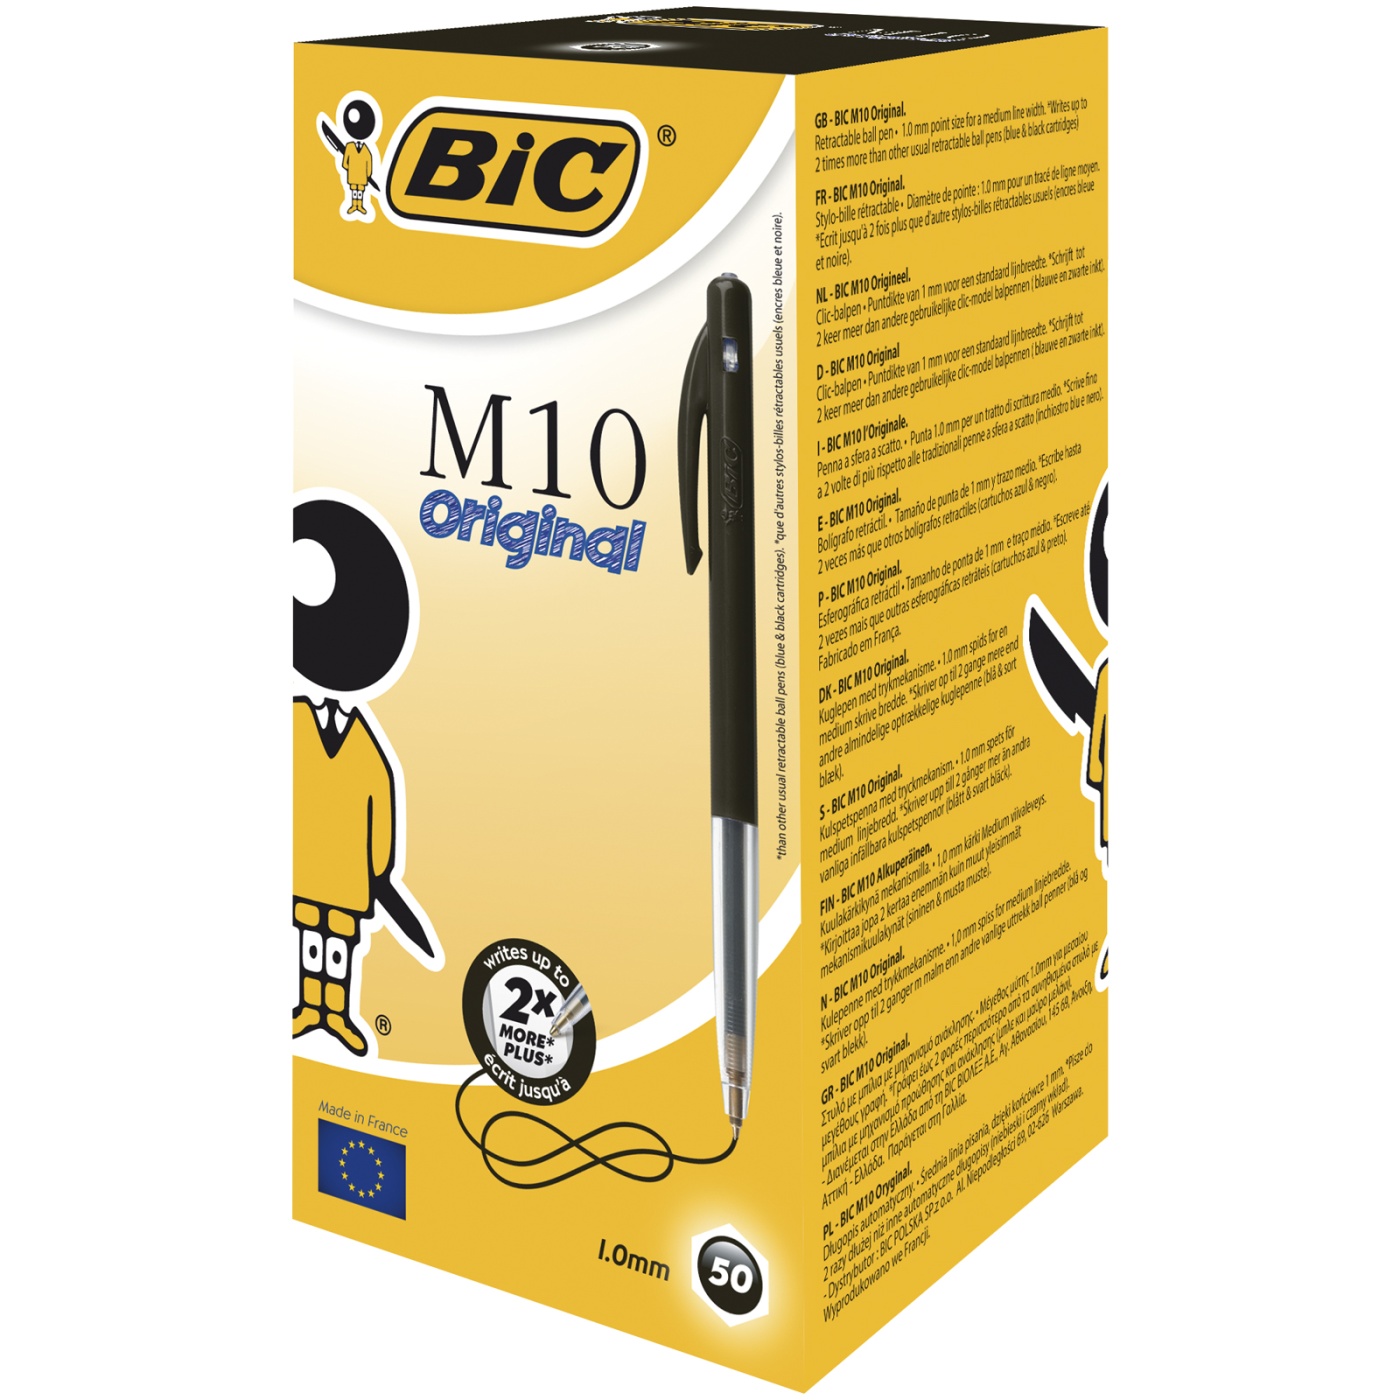 M10 Original Ballpoint Pen 50-pack in the group Pens / Office / Office Pens at Pen Store (100213_r)